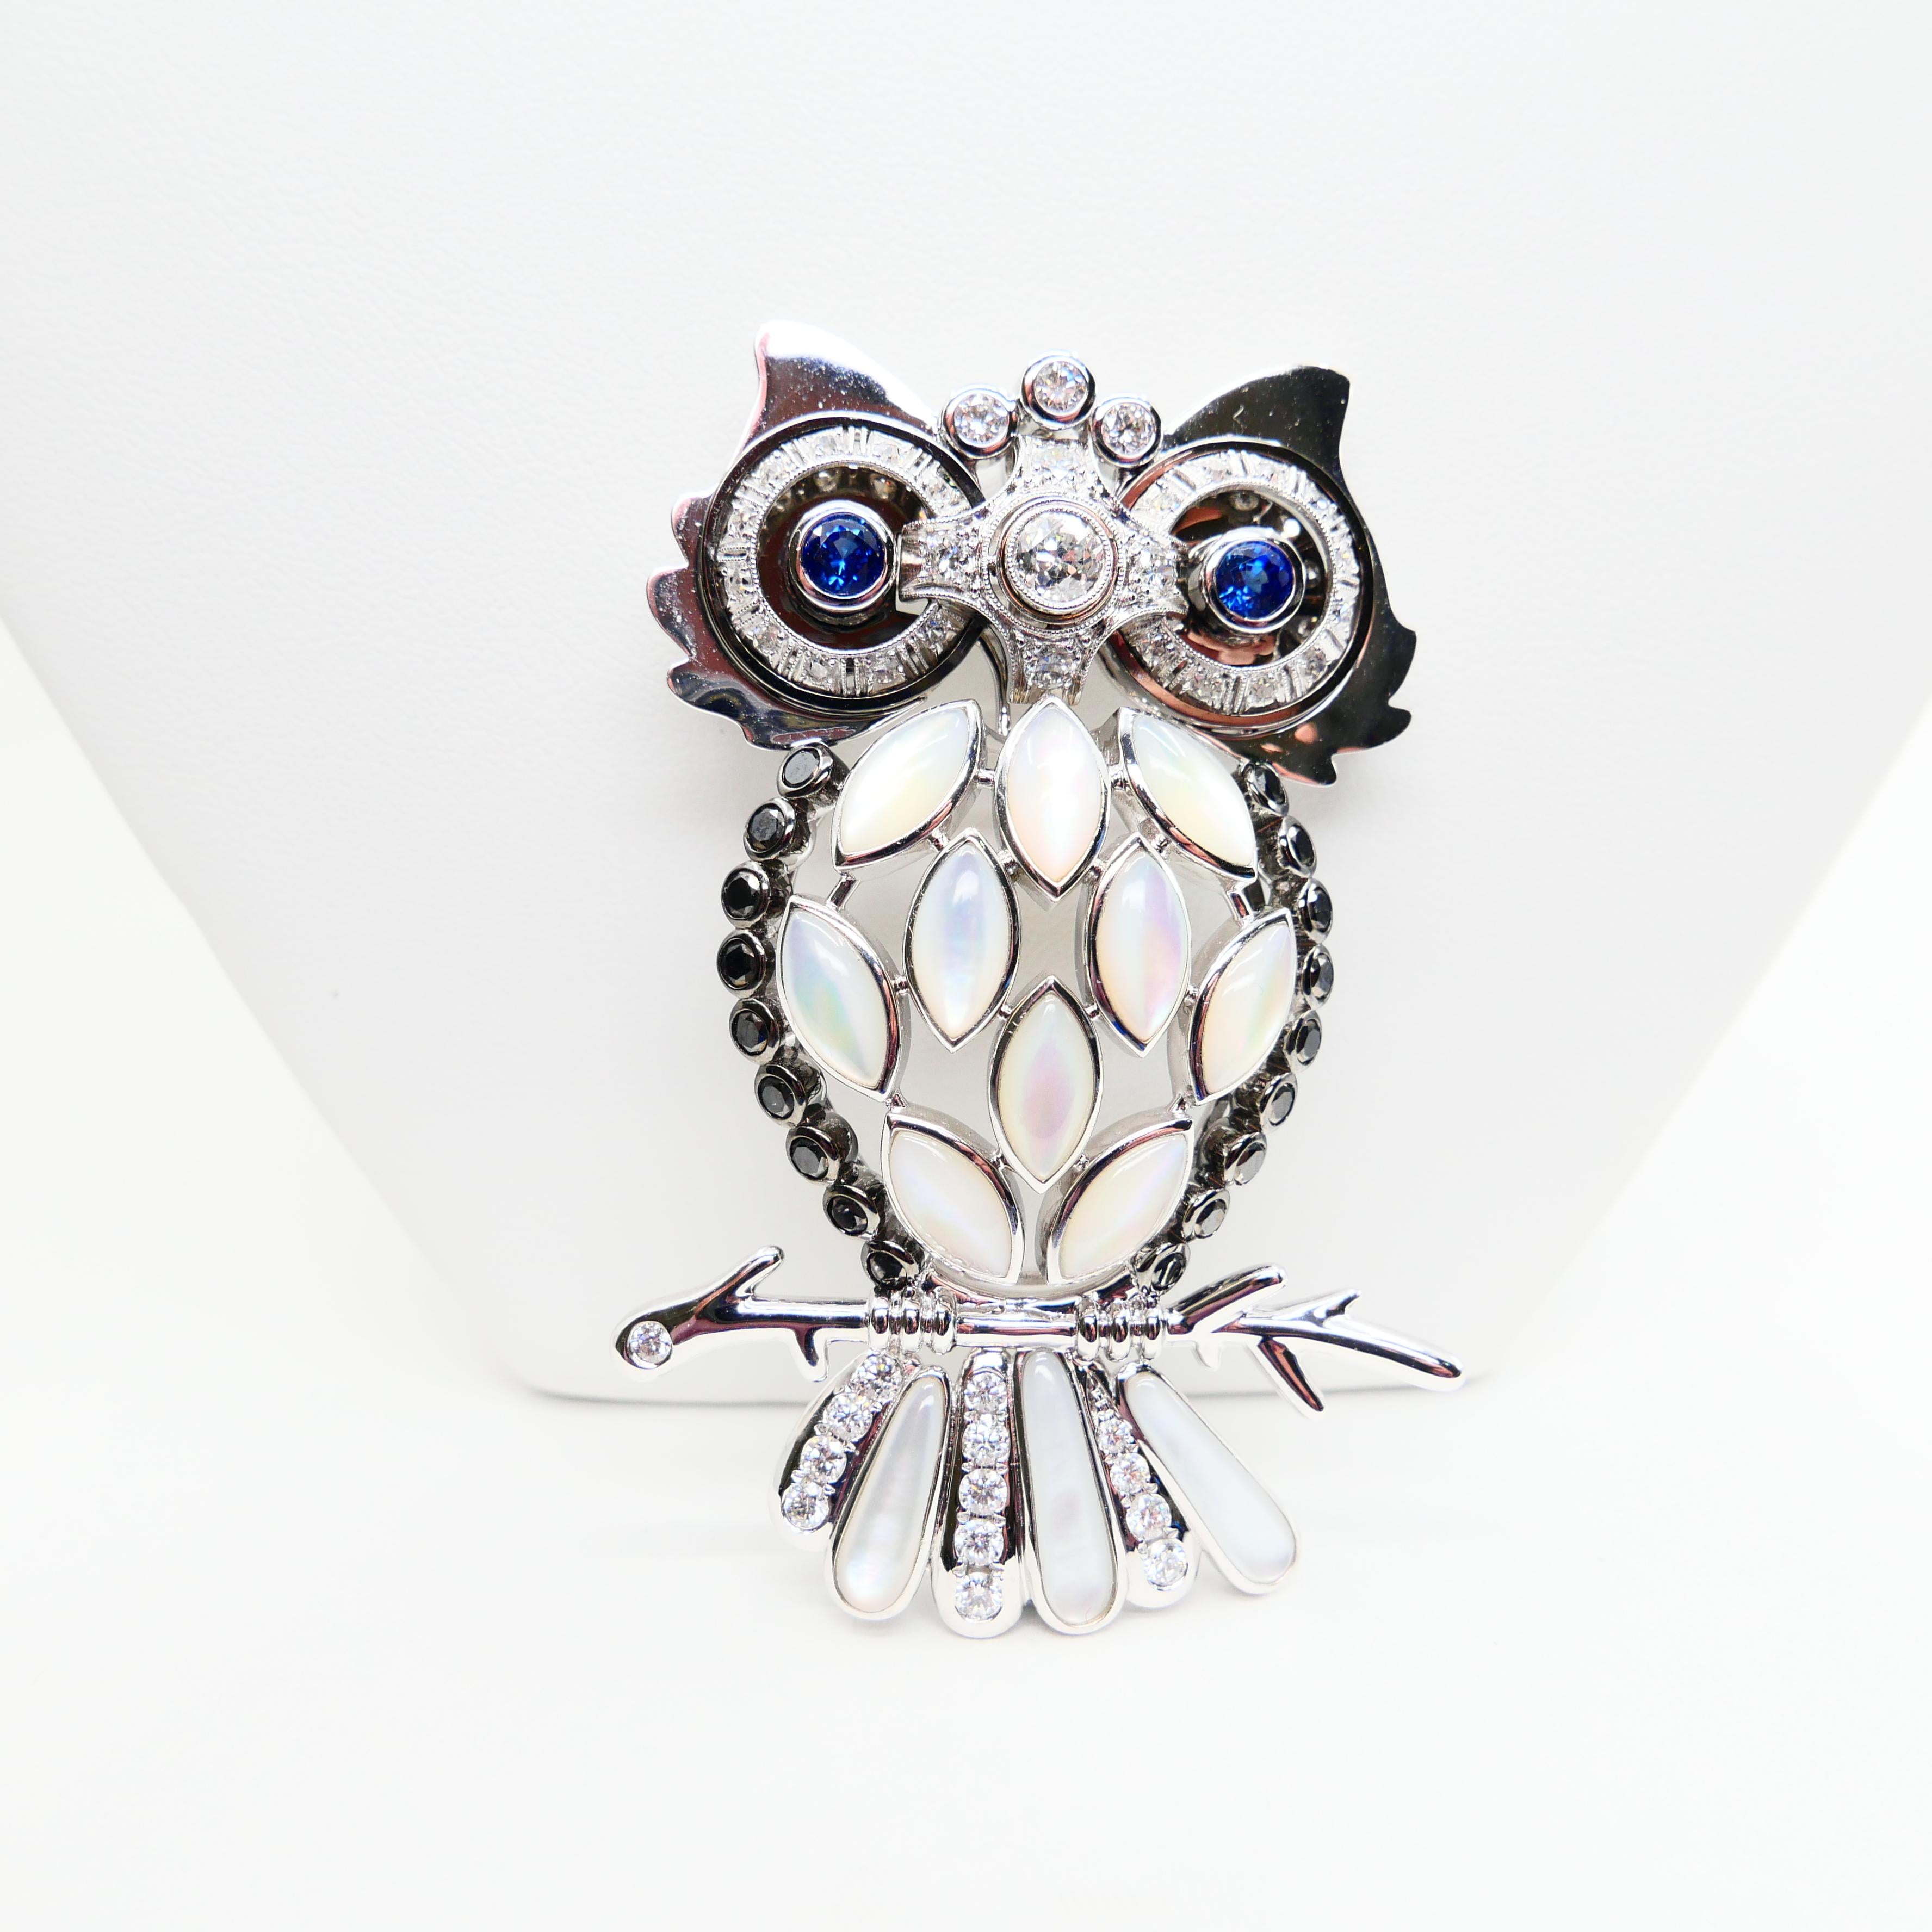 Old Cut and Black Diamonds, Sapphires, White Mother of Pearl Owl Brooch/Pendant For Sale 1